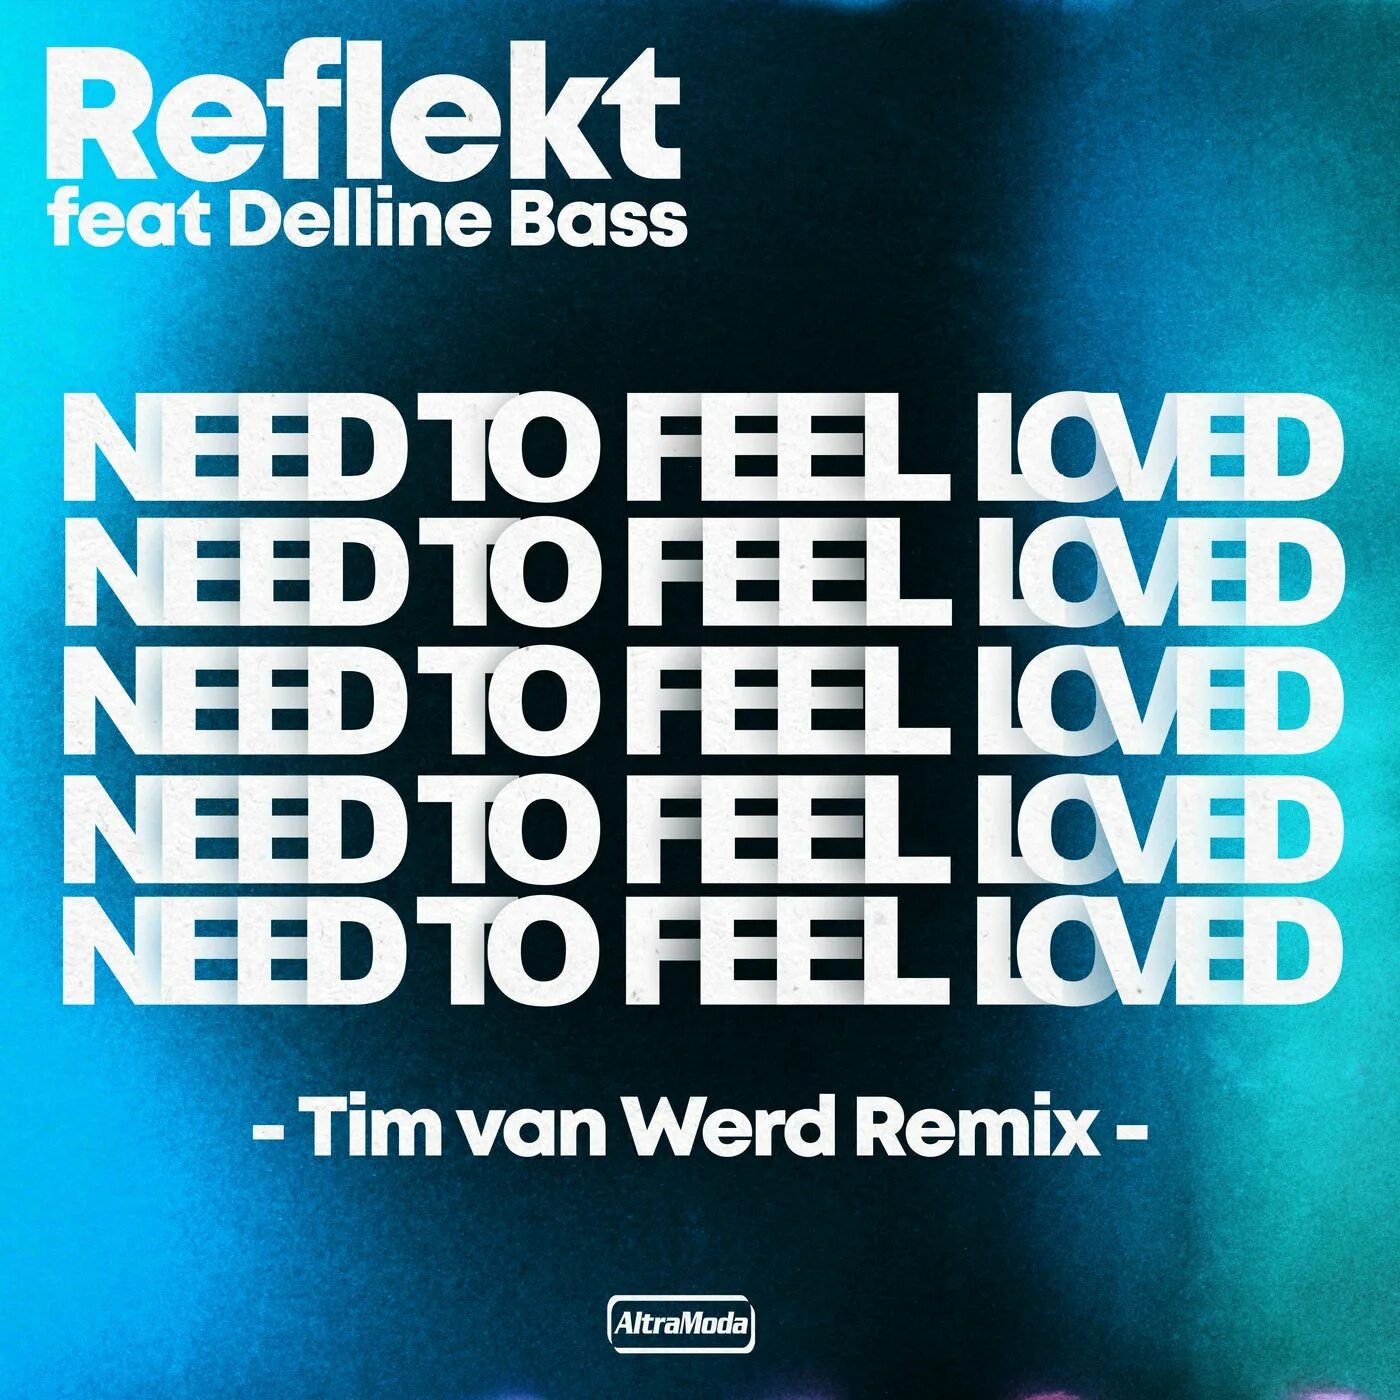 Need to feel loved feat delline bass. Reflekt ft. Delline Bass need to feel Loved. Reflekt, tim van werd feat. Delline Bass - need to feel Loved. Reflekt feat. Delline Bass. Reflekt feat. Delline Bass - need to feel Loved(Adam k & Soha Vocal Mix).